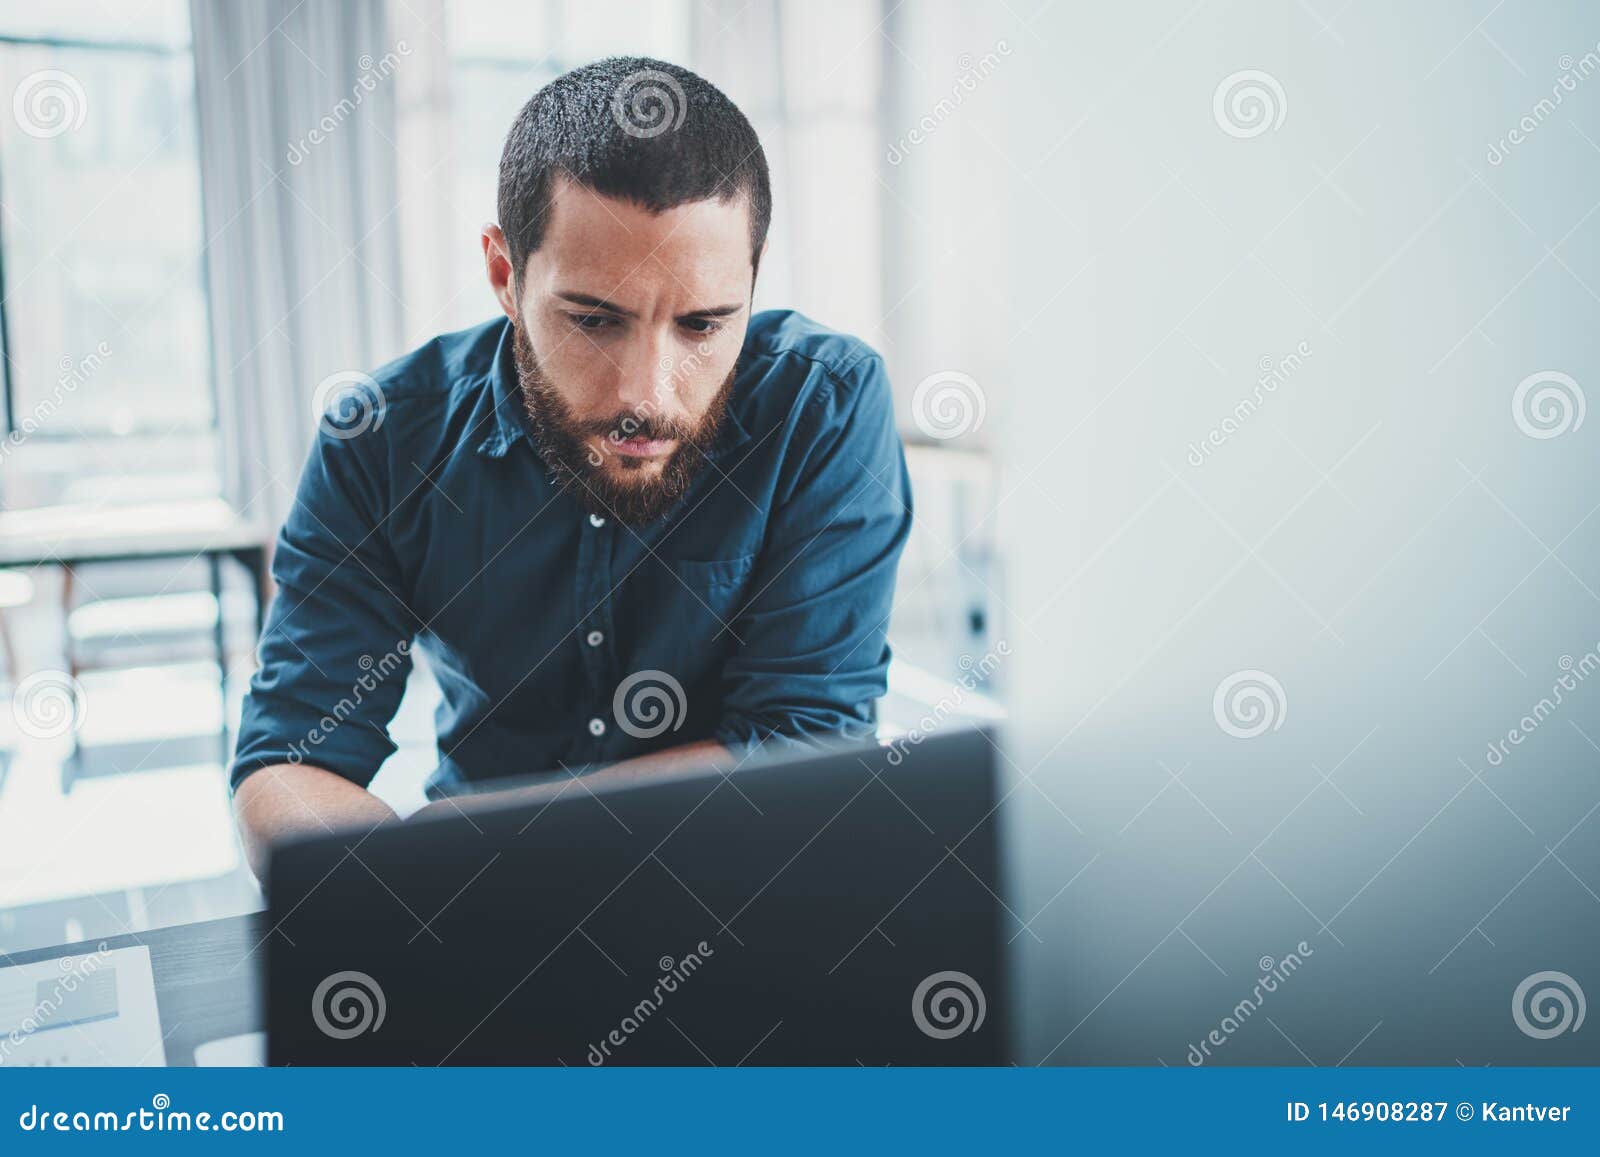 young business man working at lightful office on computer while sitting at the wooden table.